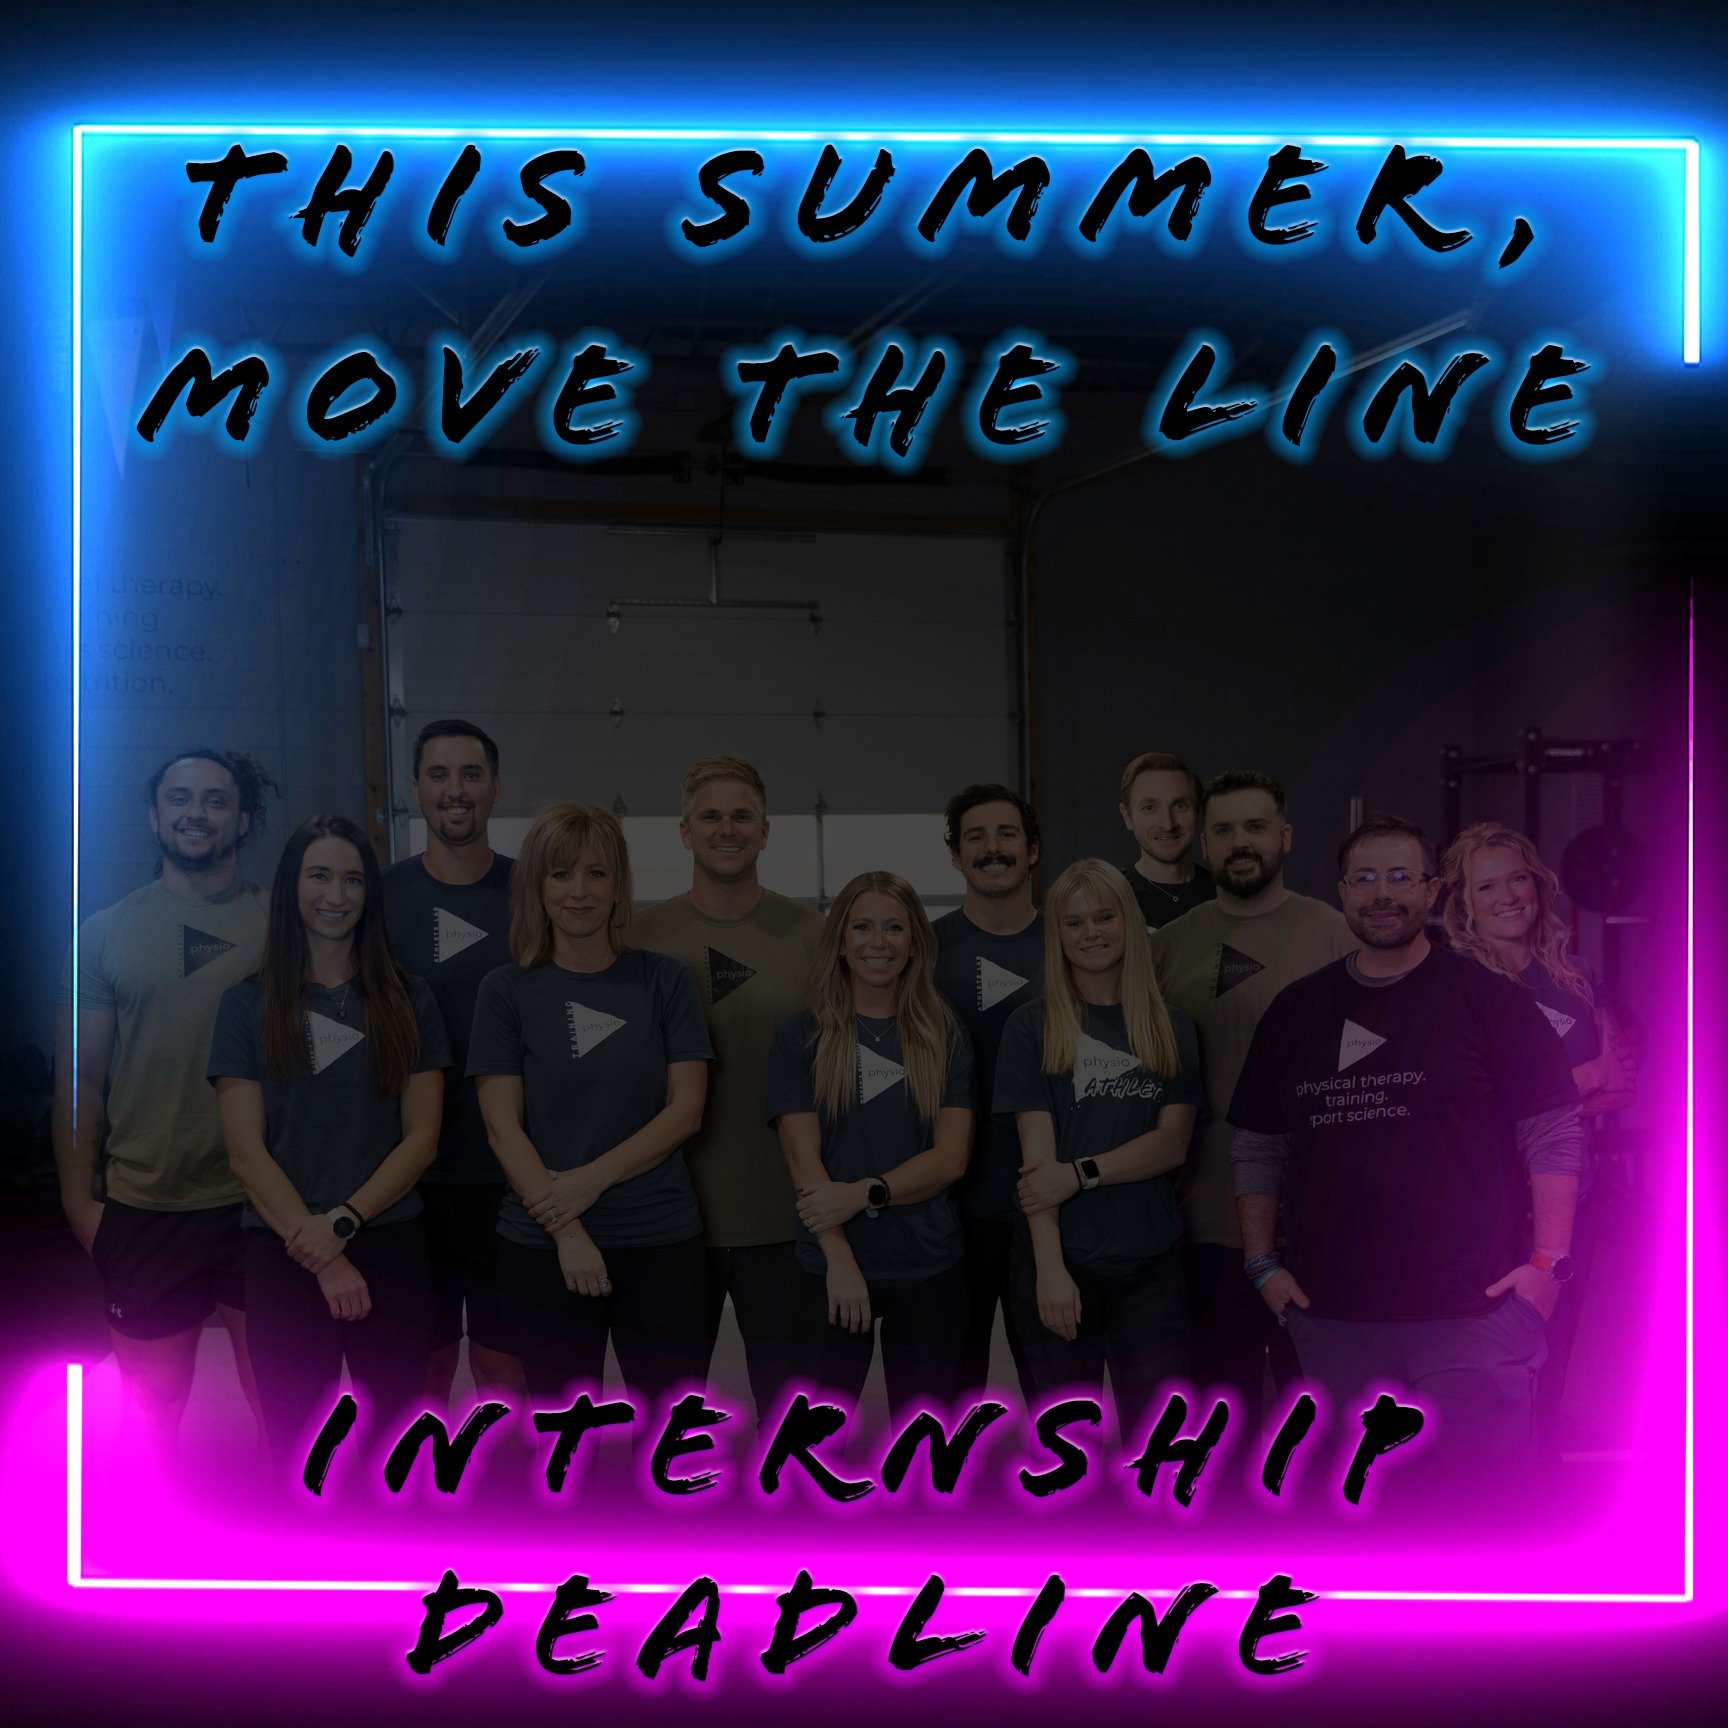 Today is the deadline for our Summer Internship Applications! Make the most of your summer break, and work with the best in the business. Phyical Therapy and Training internships are available, all you need to do is submit your information - https://